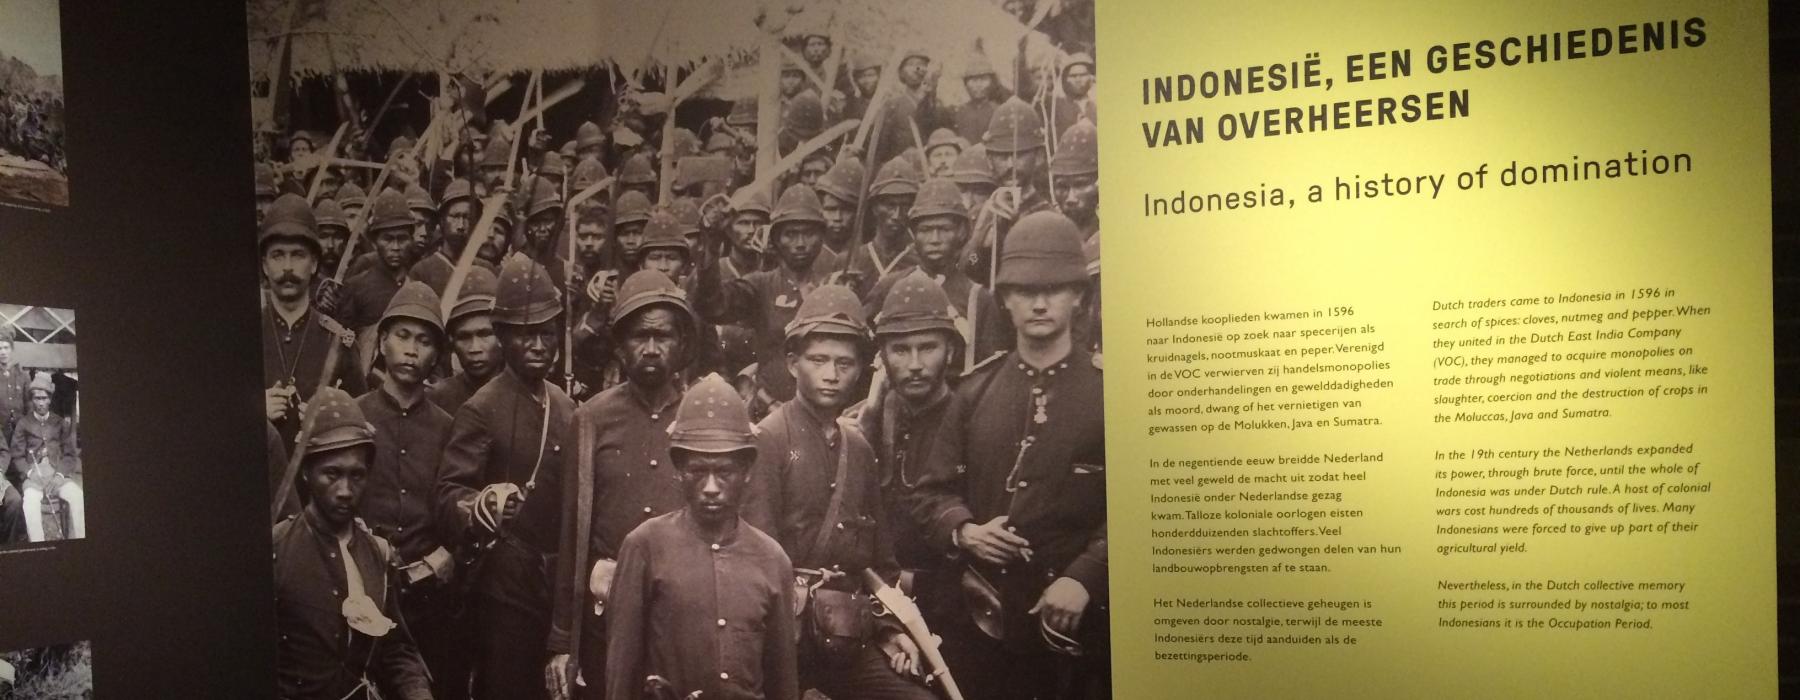 Figure 2: Part of the Indonesia exhibition, Tropenmuseum Amsterdam. Author’s own photograph.   